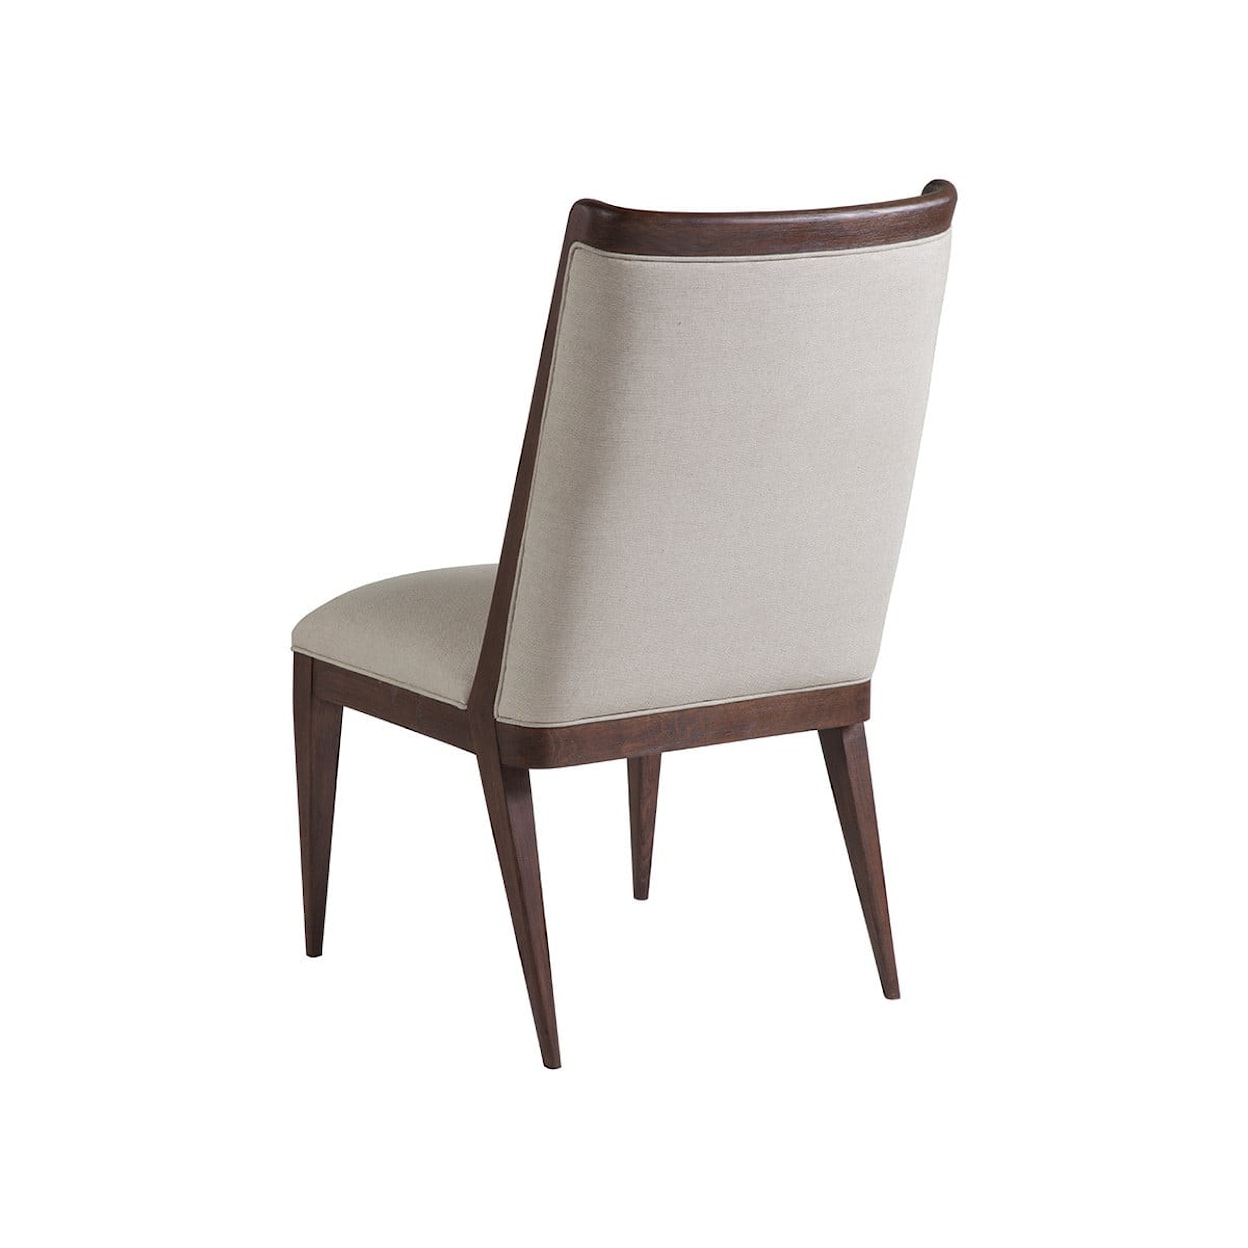 Artistica Cohesion Haiku Upholstered Side Chair